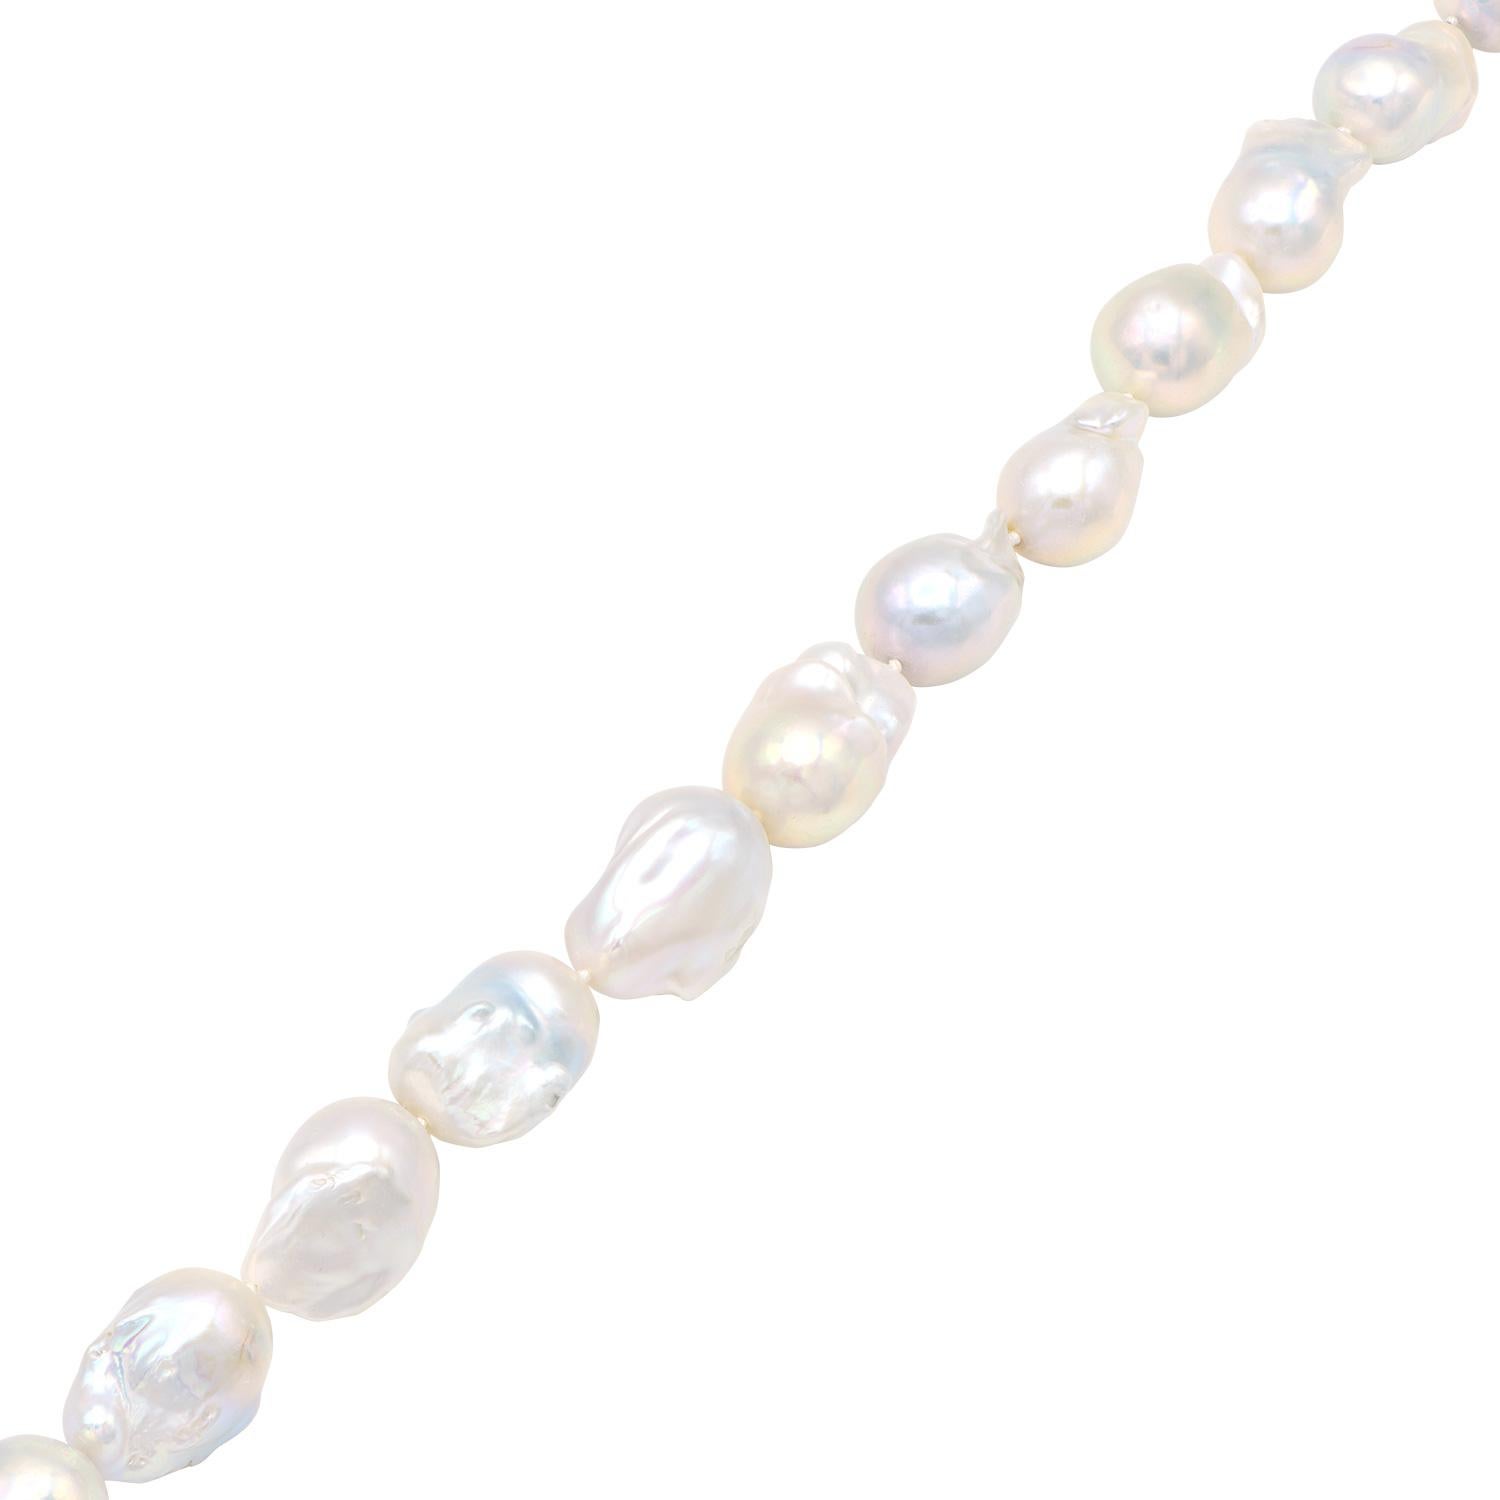 This unique and beautiful necklace is made from large 18-22mm baroque white freshwater pearls. Each pearl has its own unique luster and shape made out of 16 pearls. This necklace is expertly strung with a double knot in between each pearl to make a